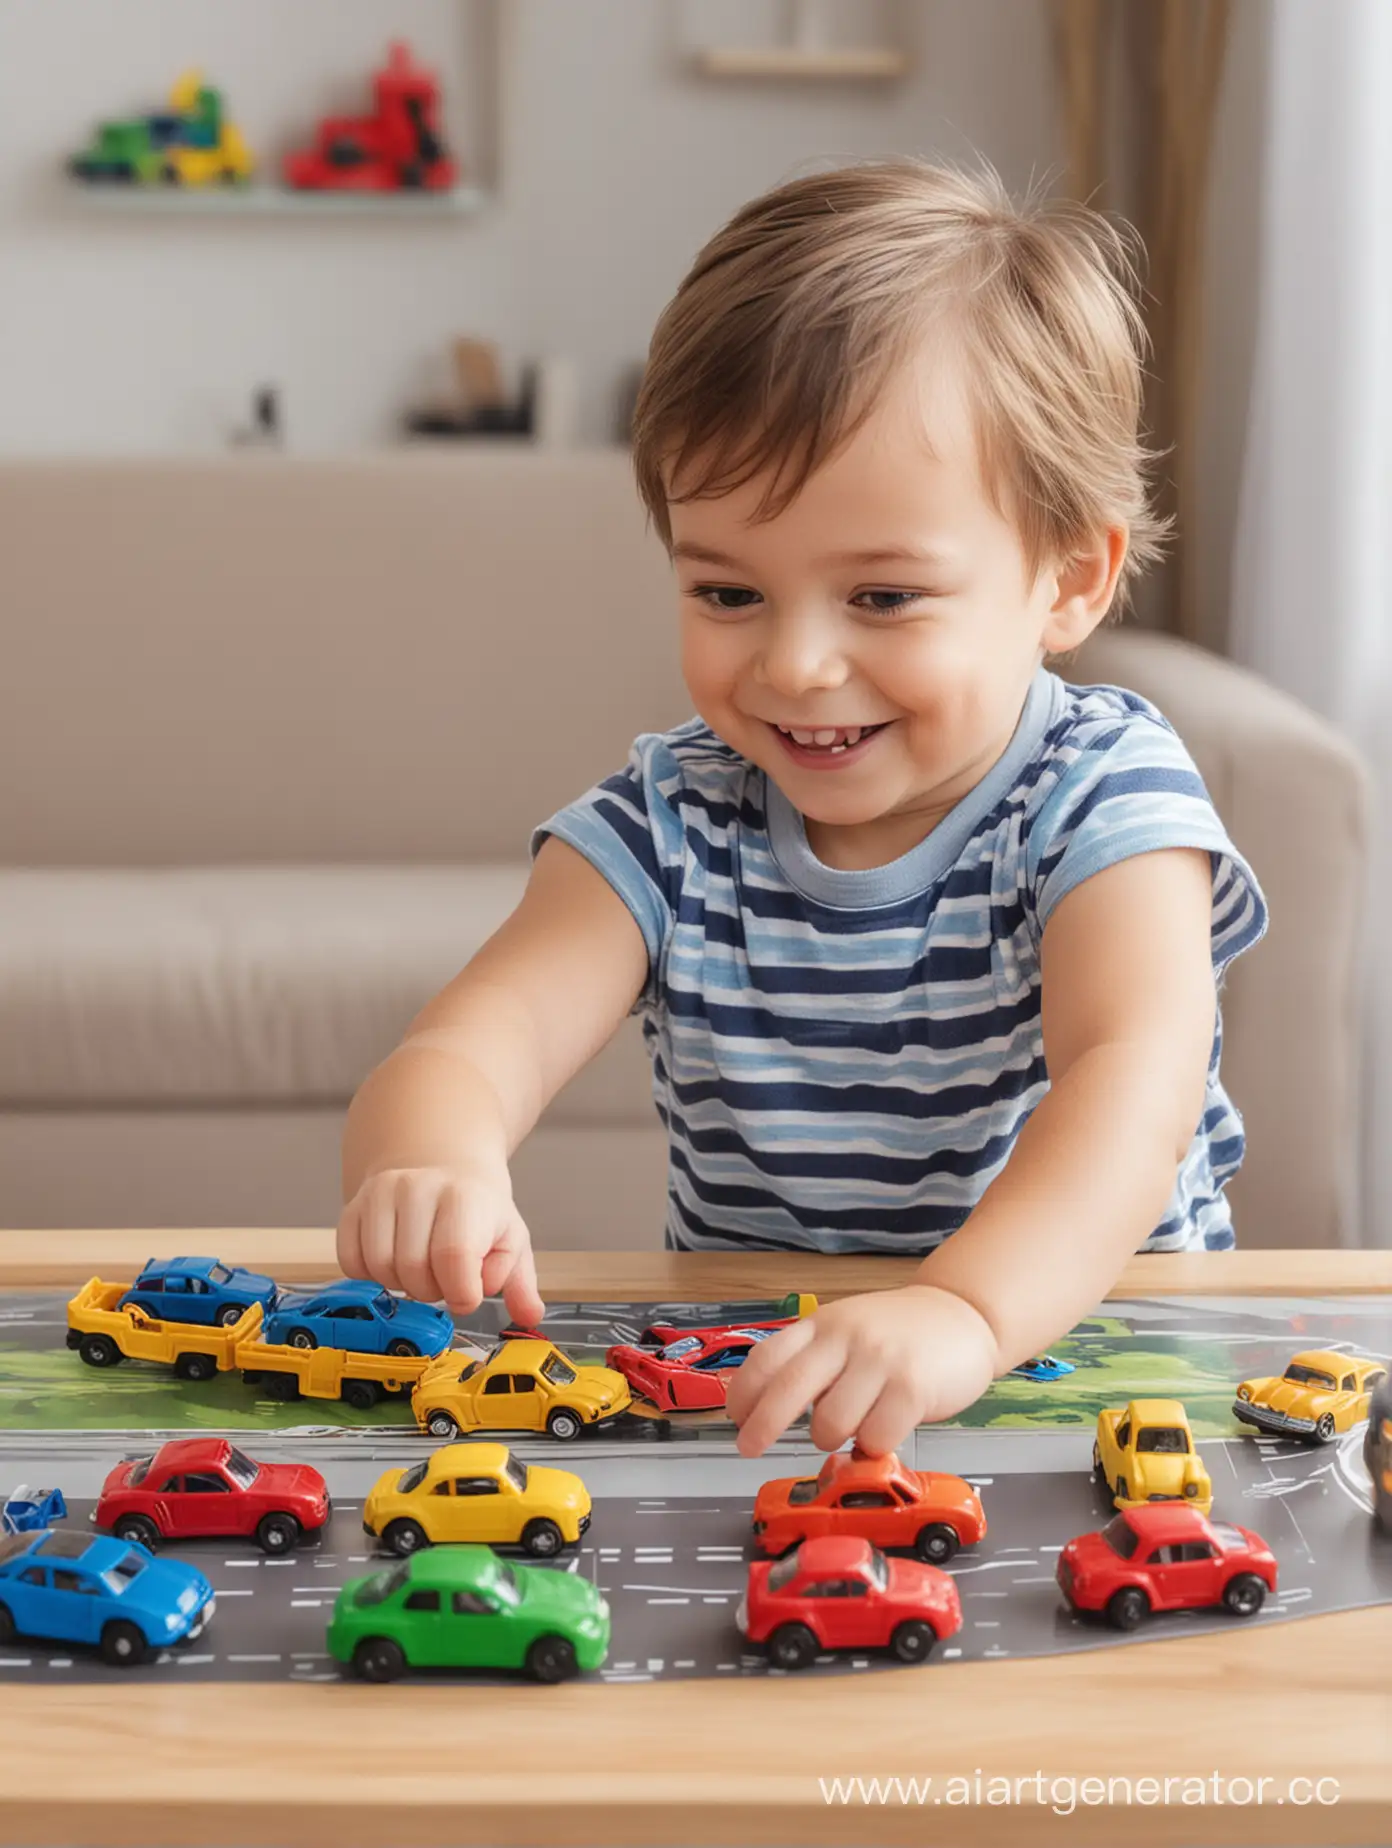 Joyful-Toddler-Engaged-in-Play-with-Toy-Cars-on-Wooden-Table